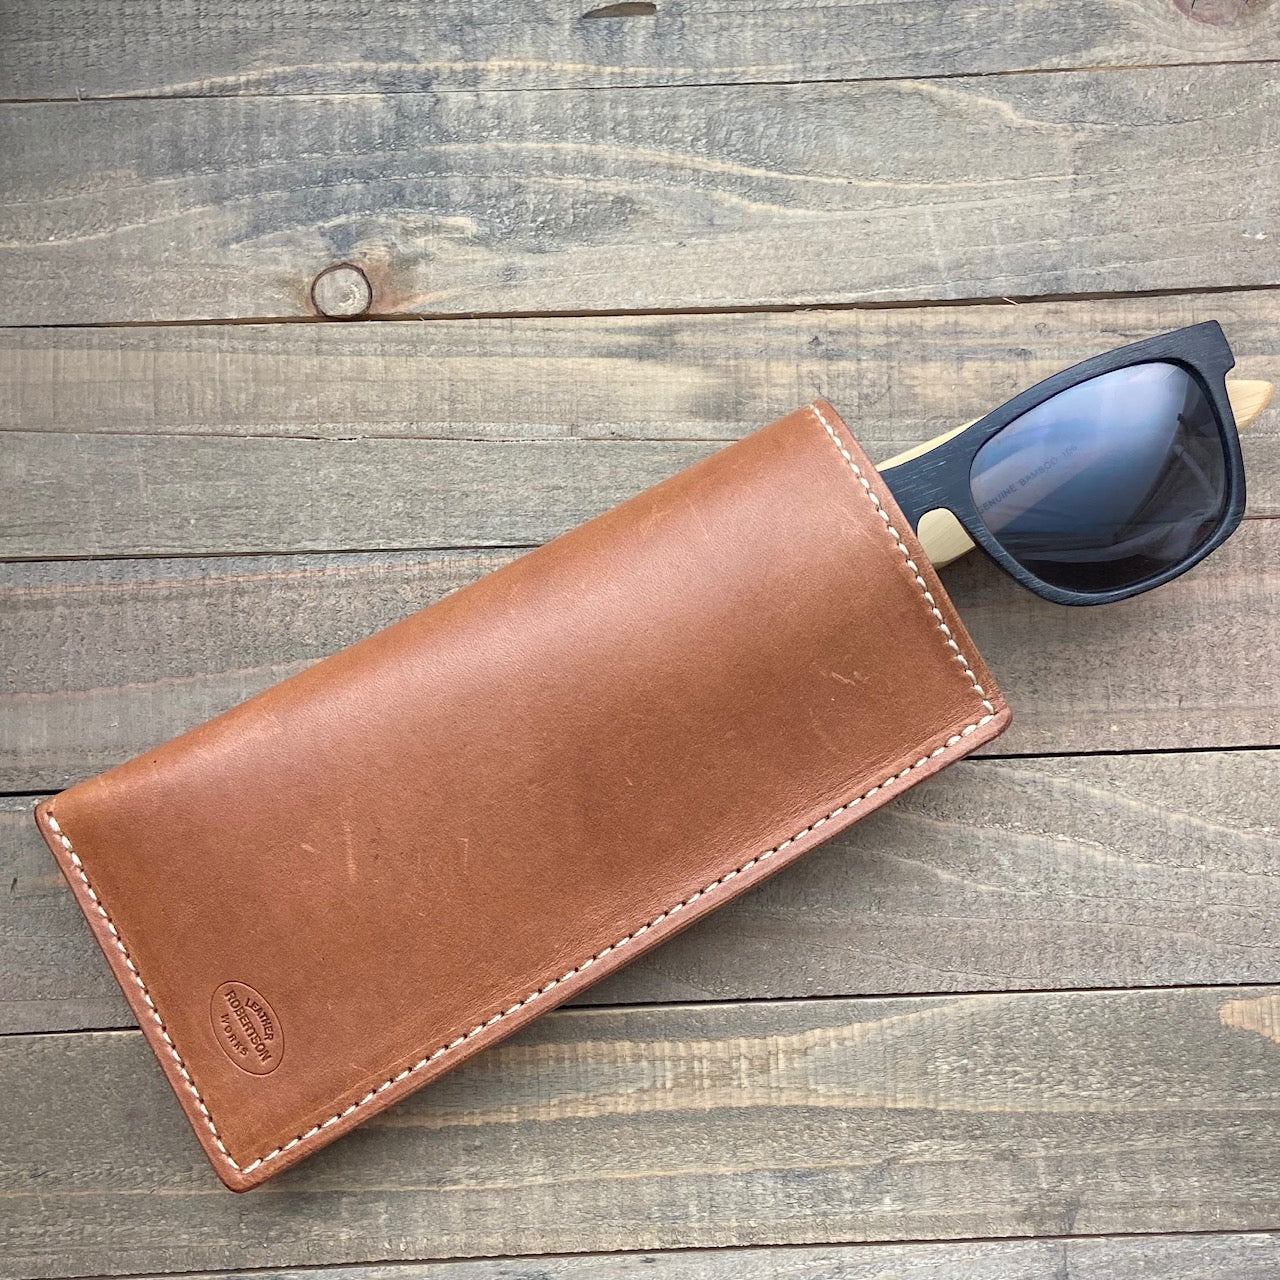 Saddle Heritage Sunglasses Case, Lined in Suede